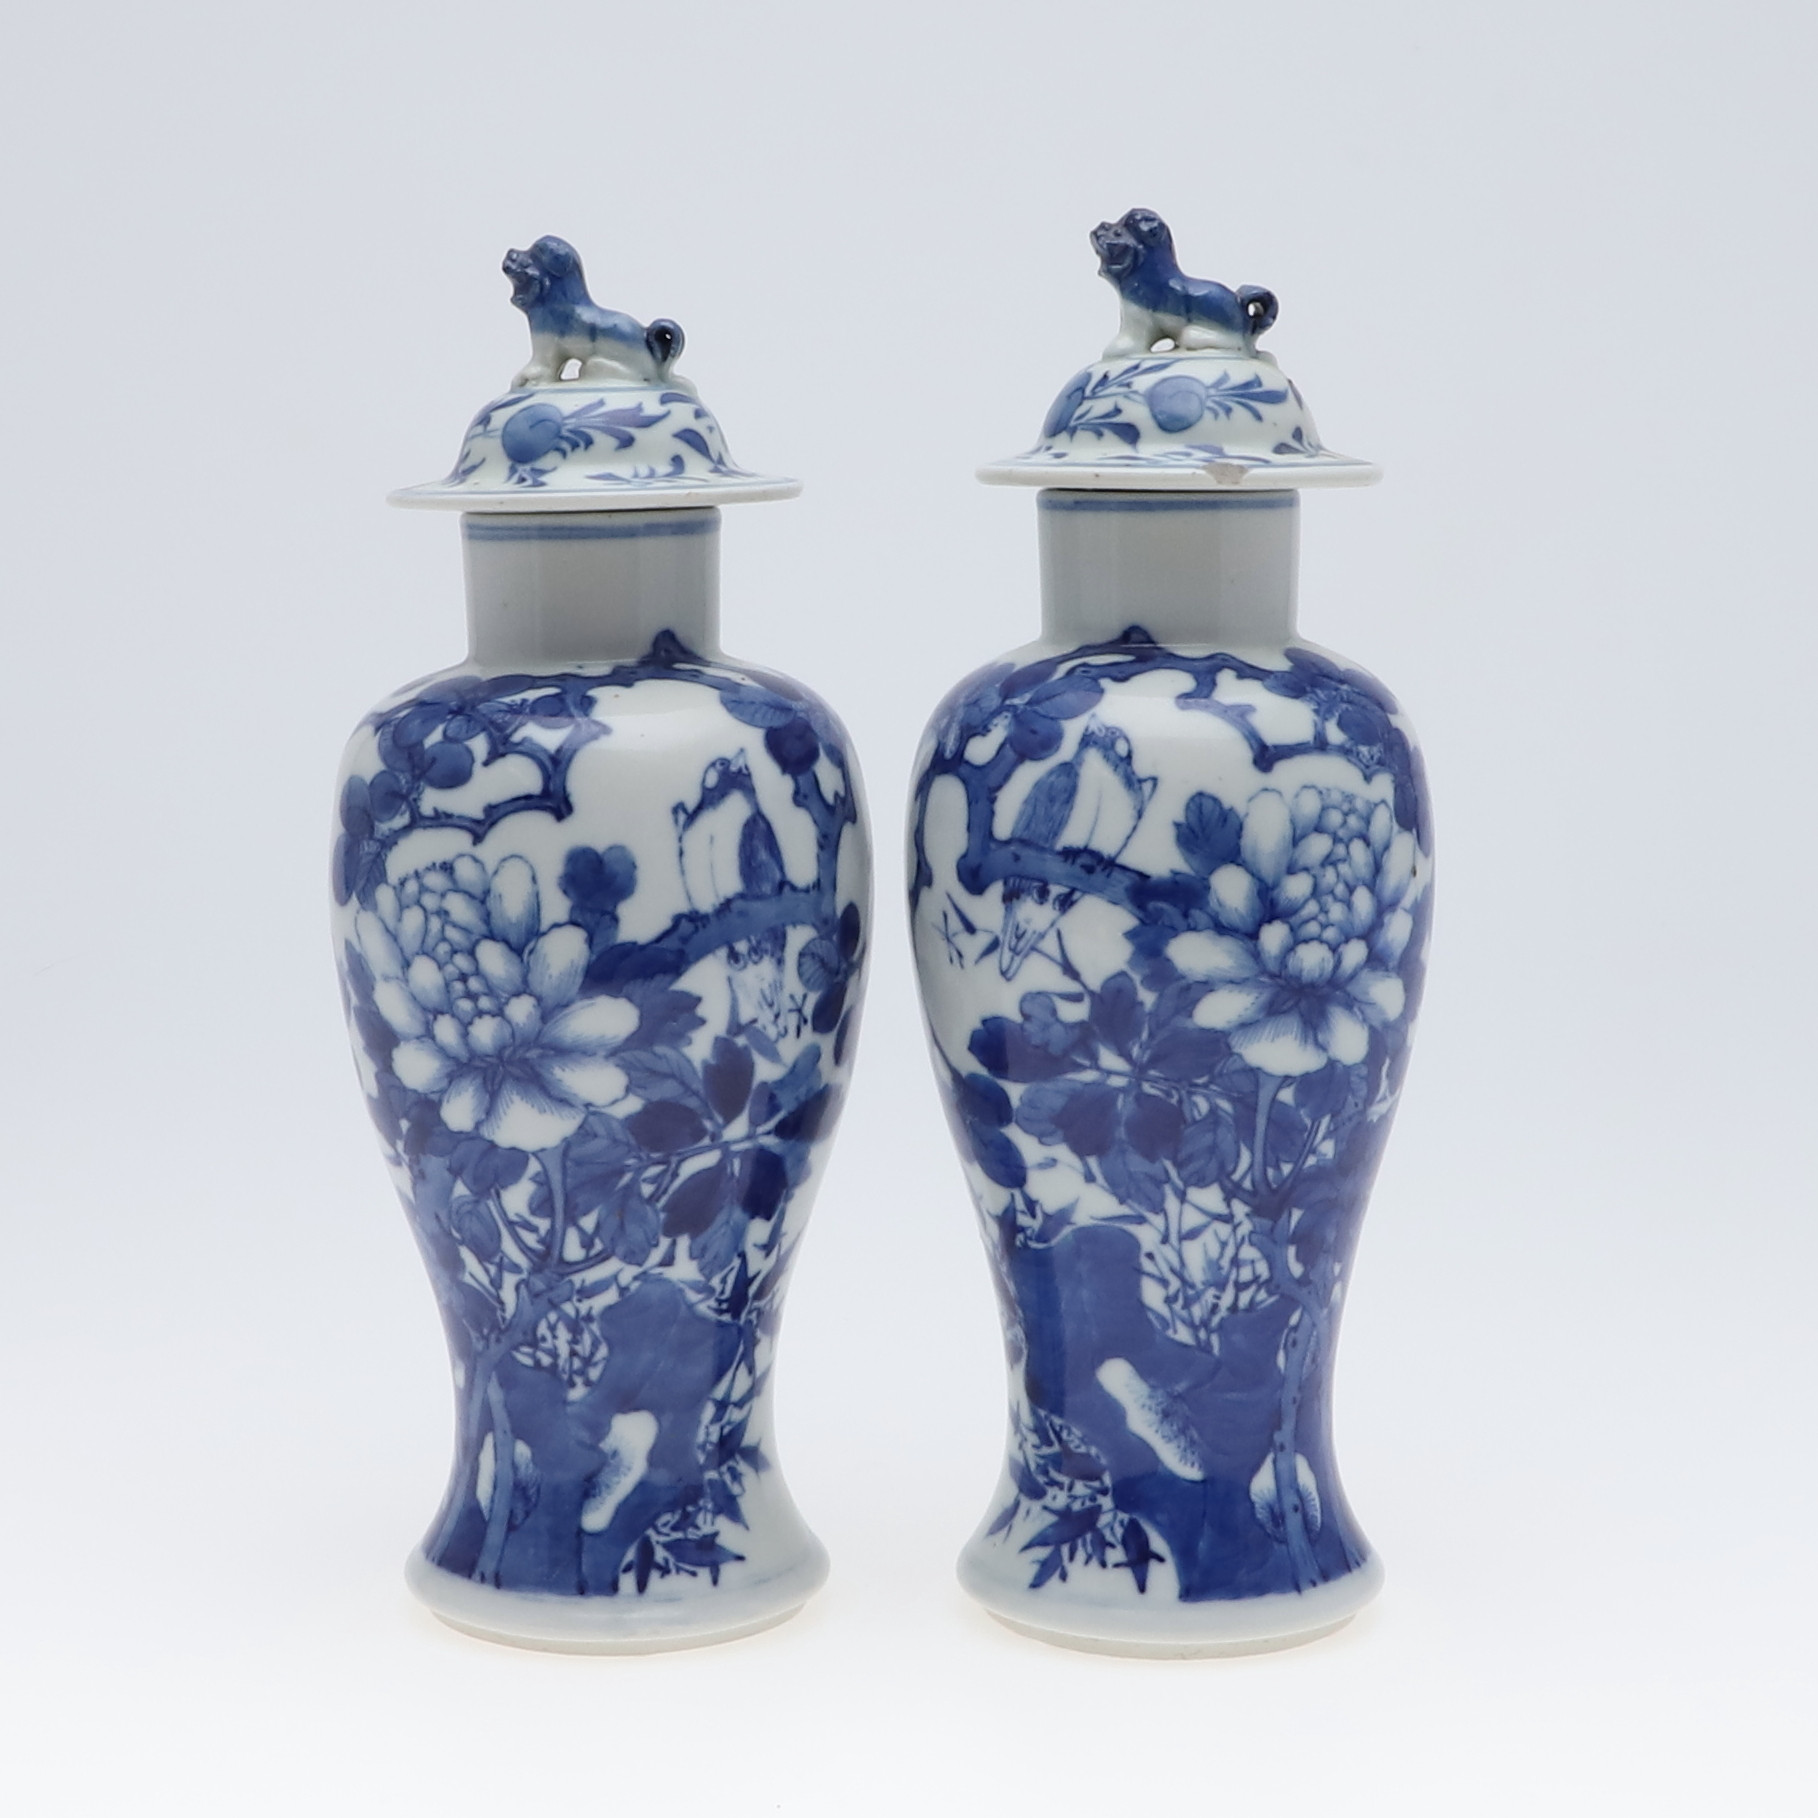 PAIR OF CHINESE BLUE & WHITE VASES & COVERS.